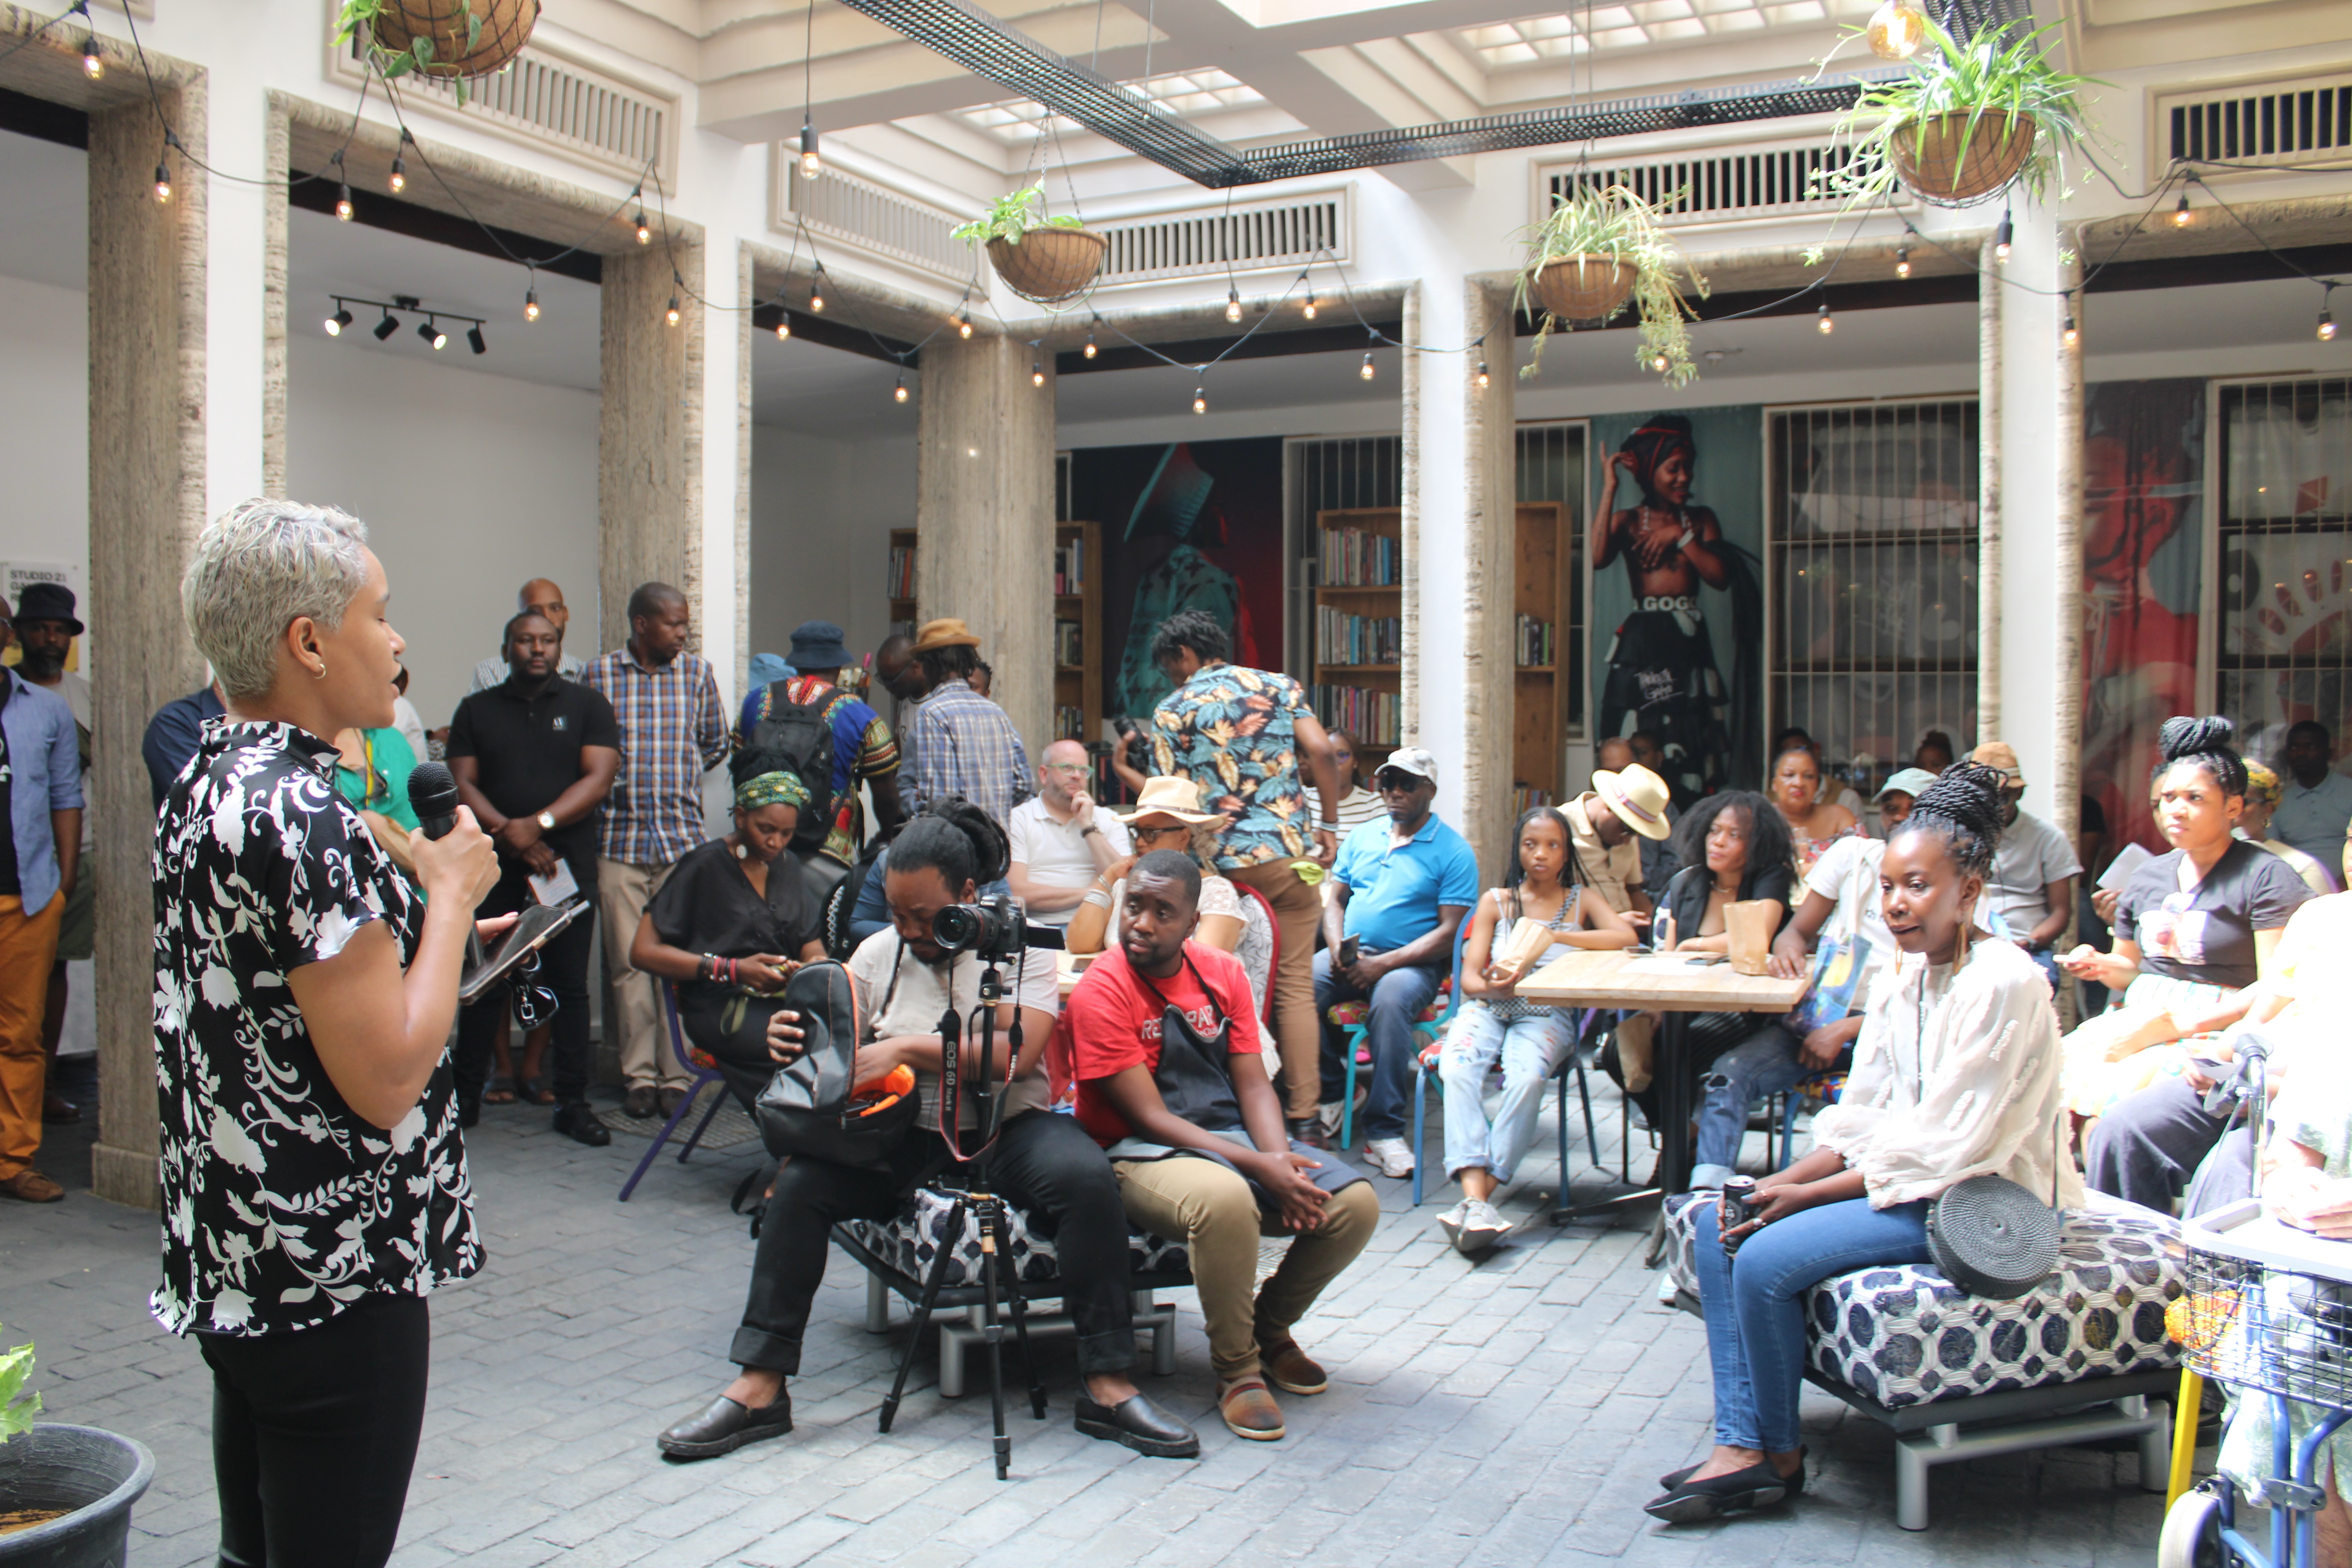 Constitution Hill launches a groundbreaking hub to steer creative entrepreneurs towards sustainability